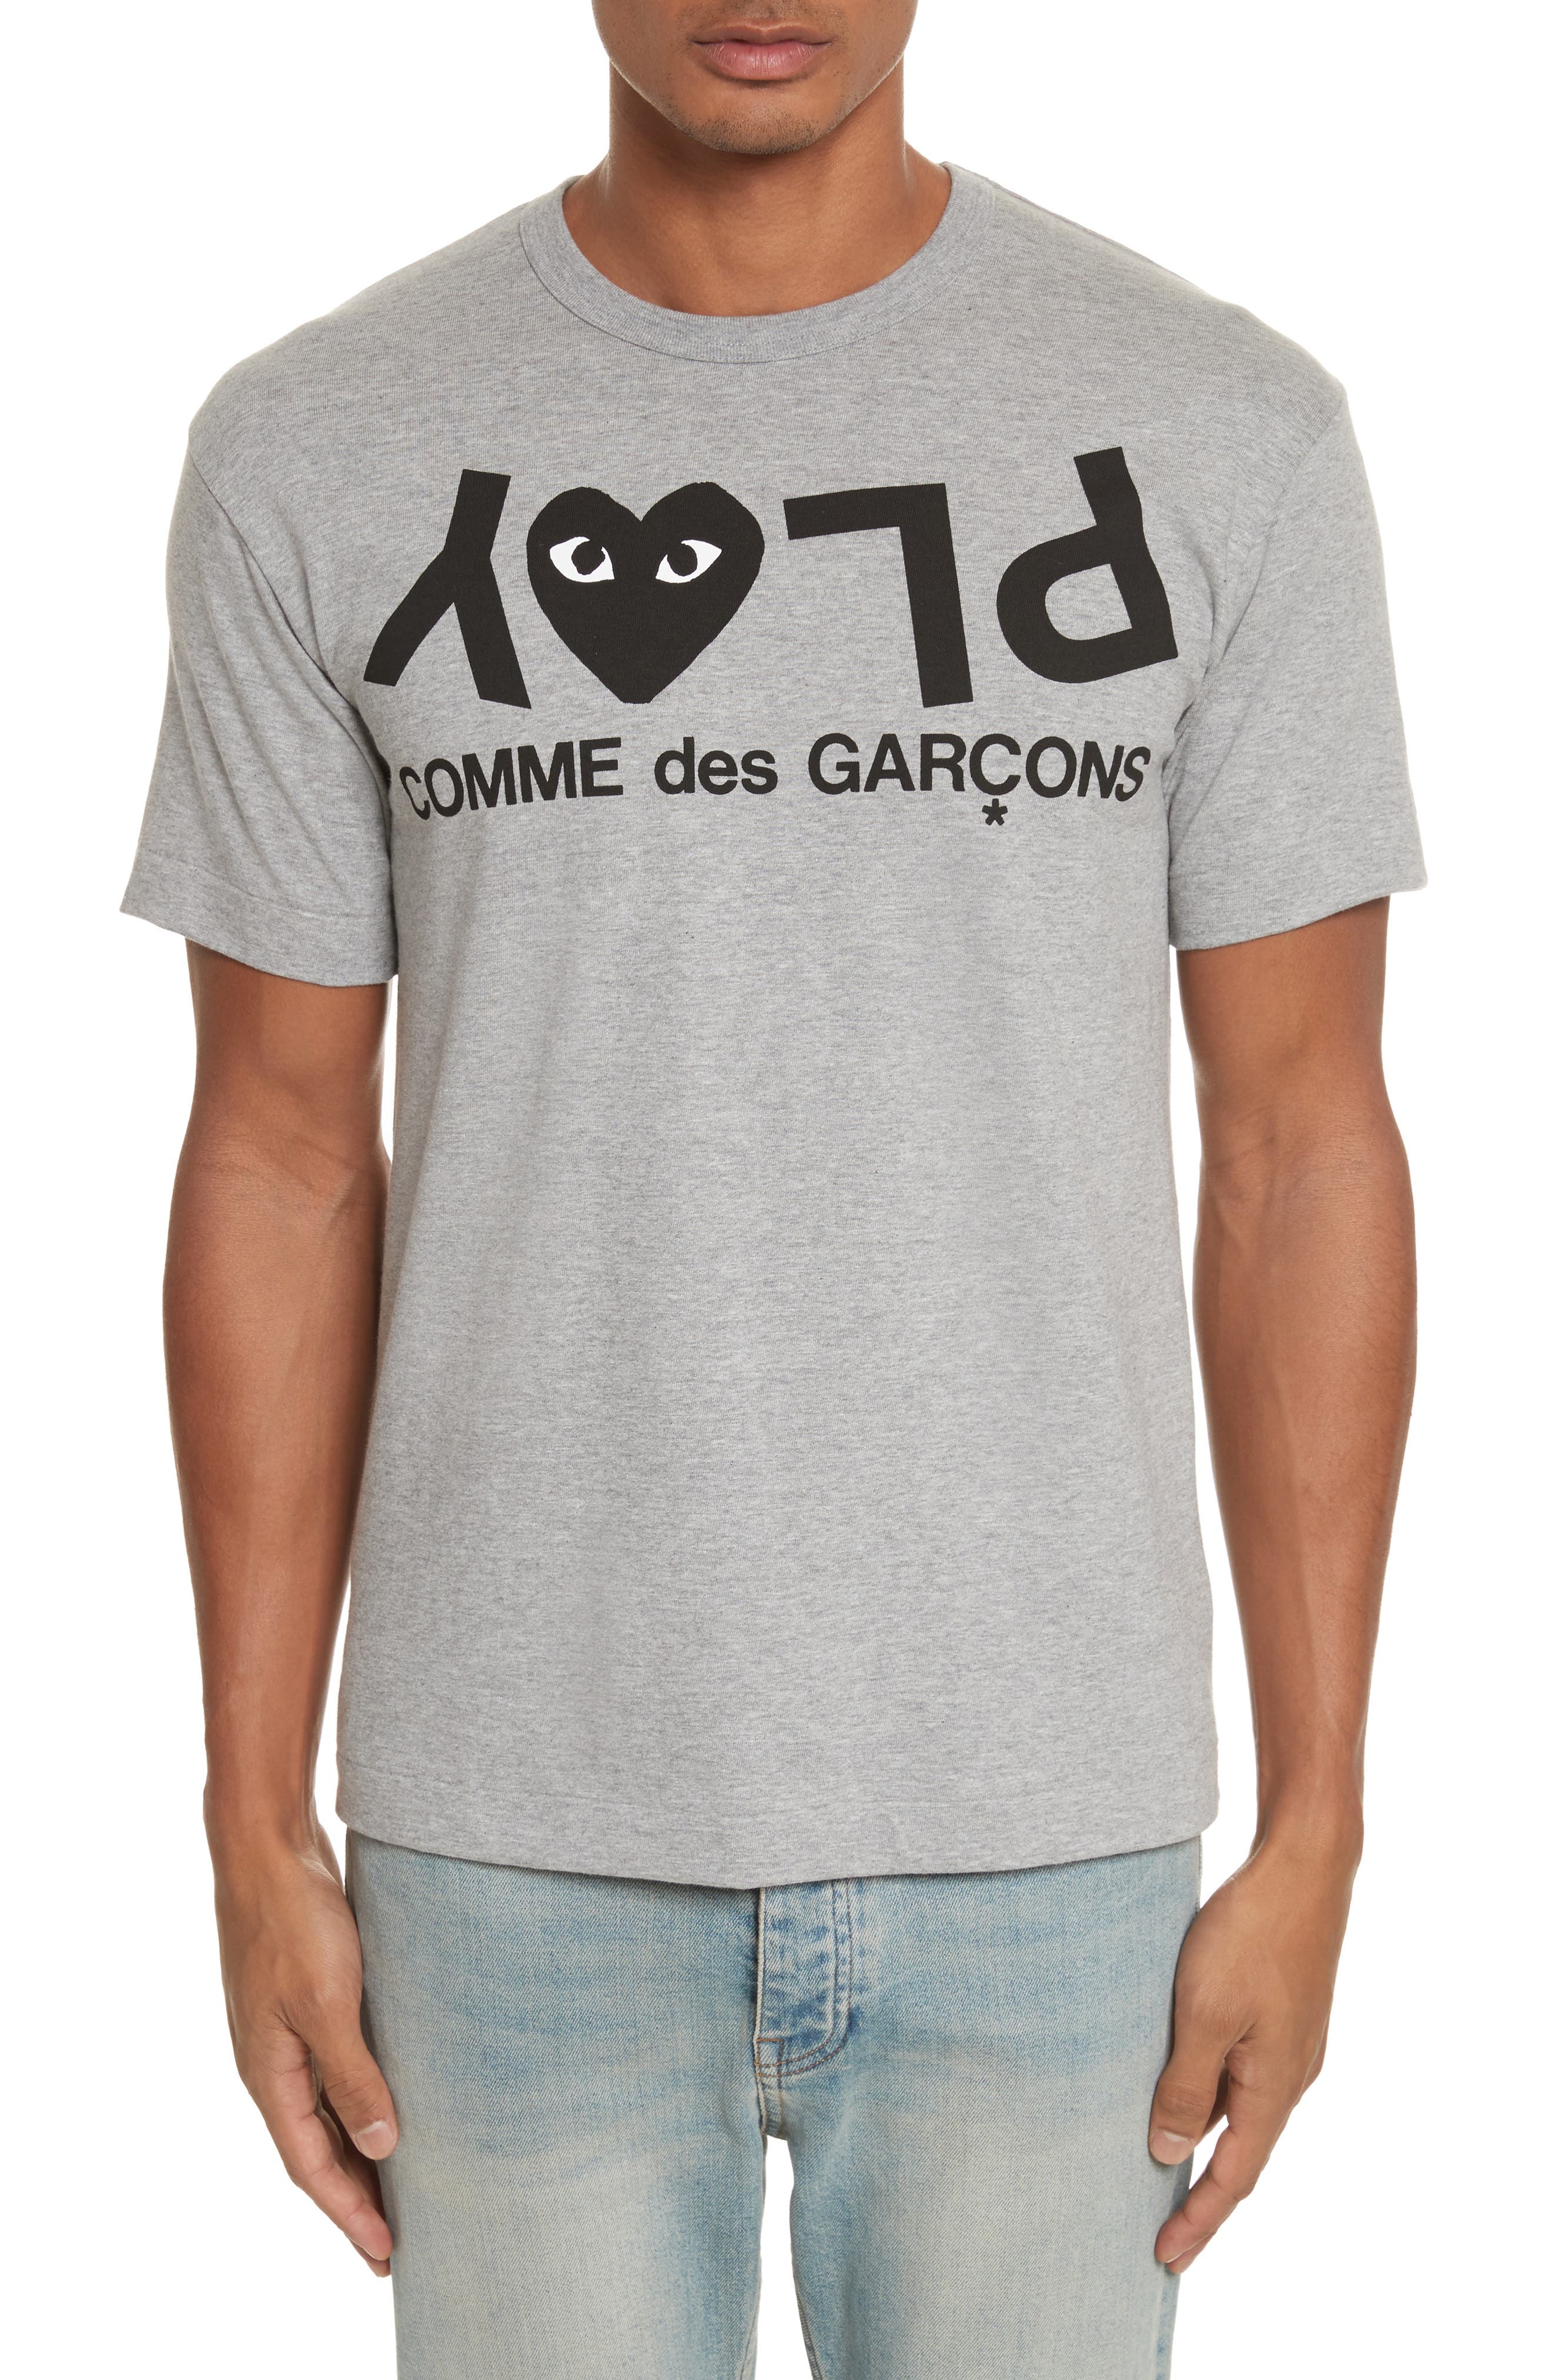 comme des garcons play inverted heart logo tee